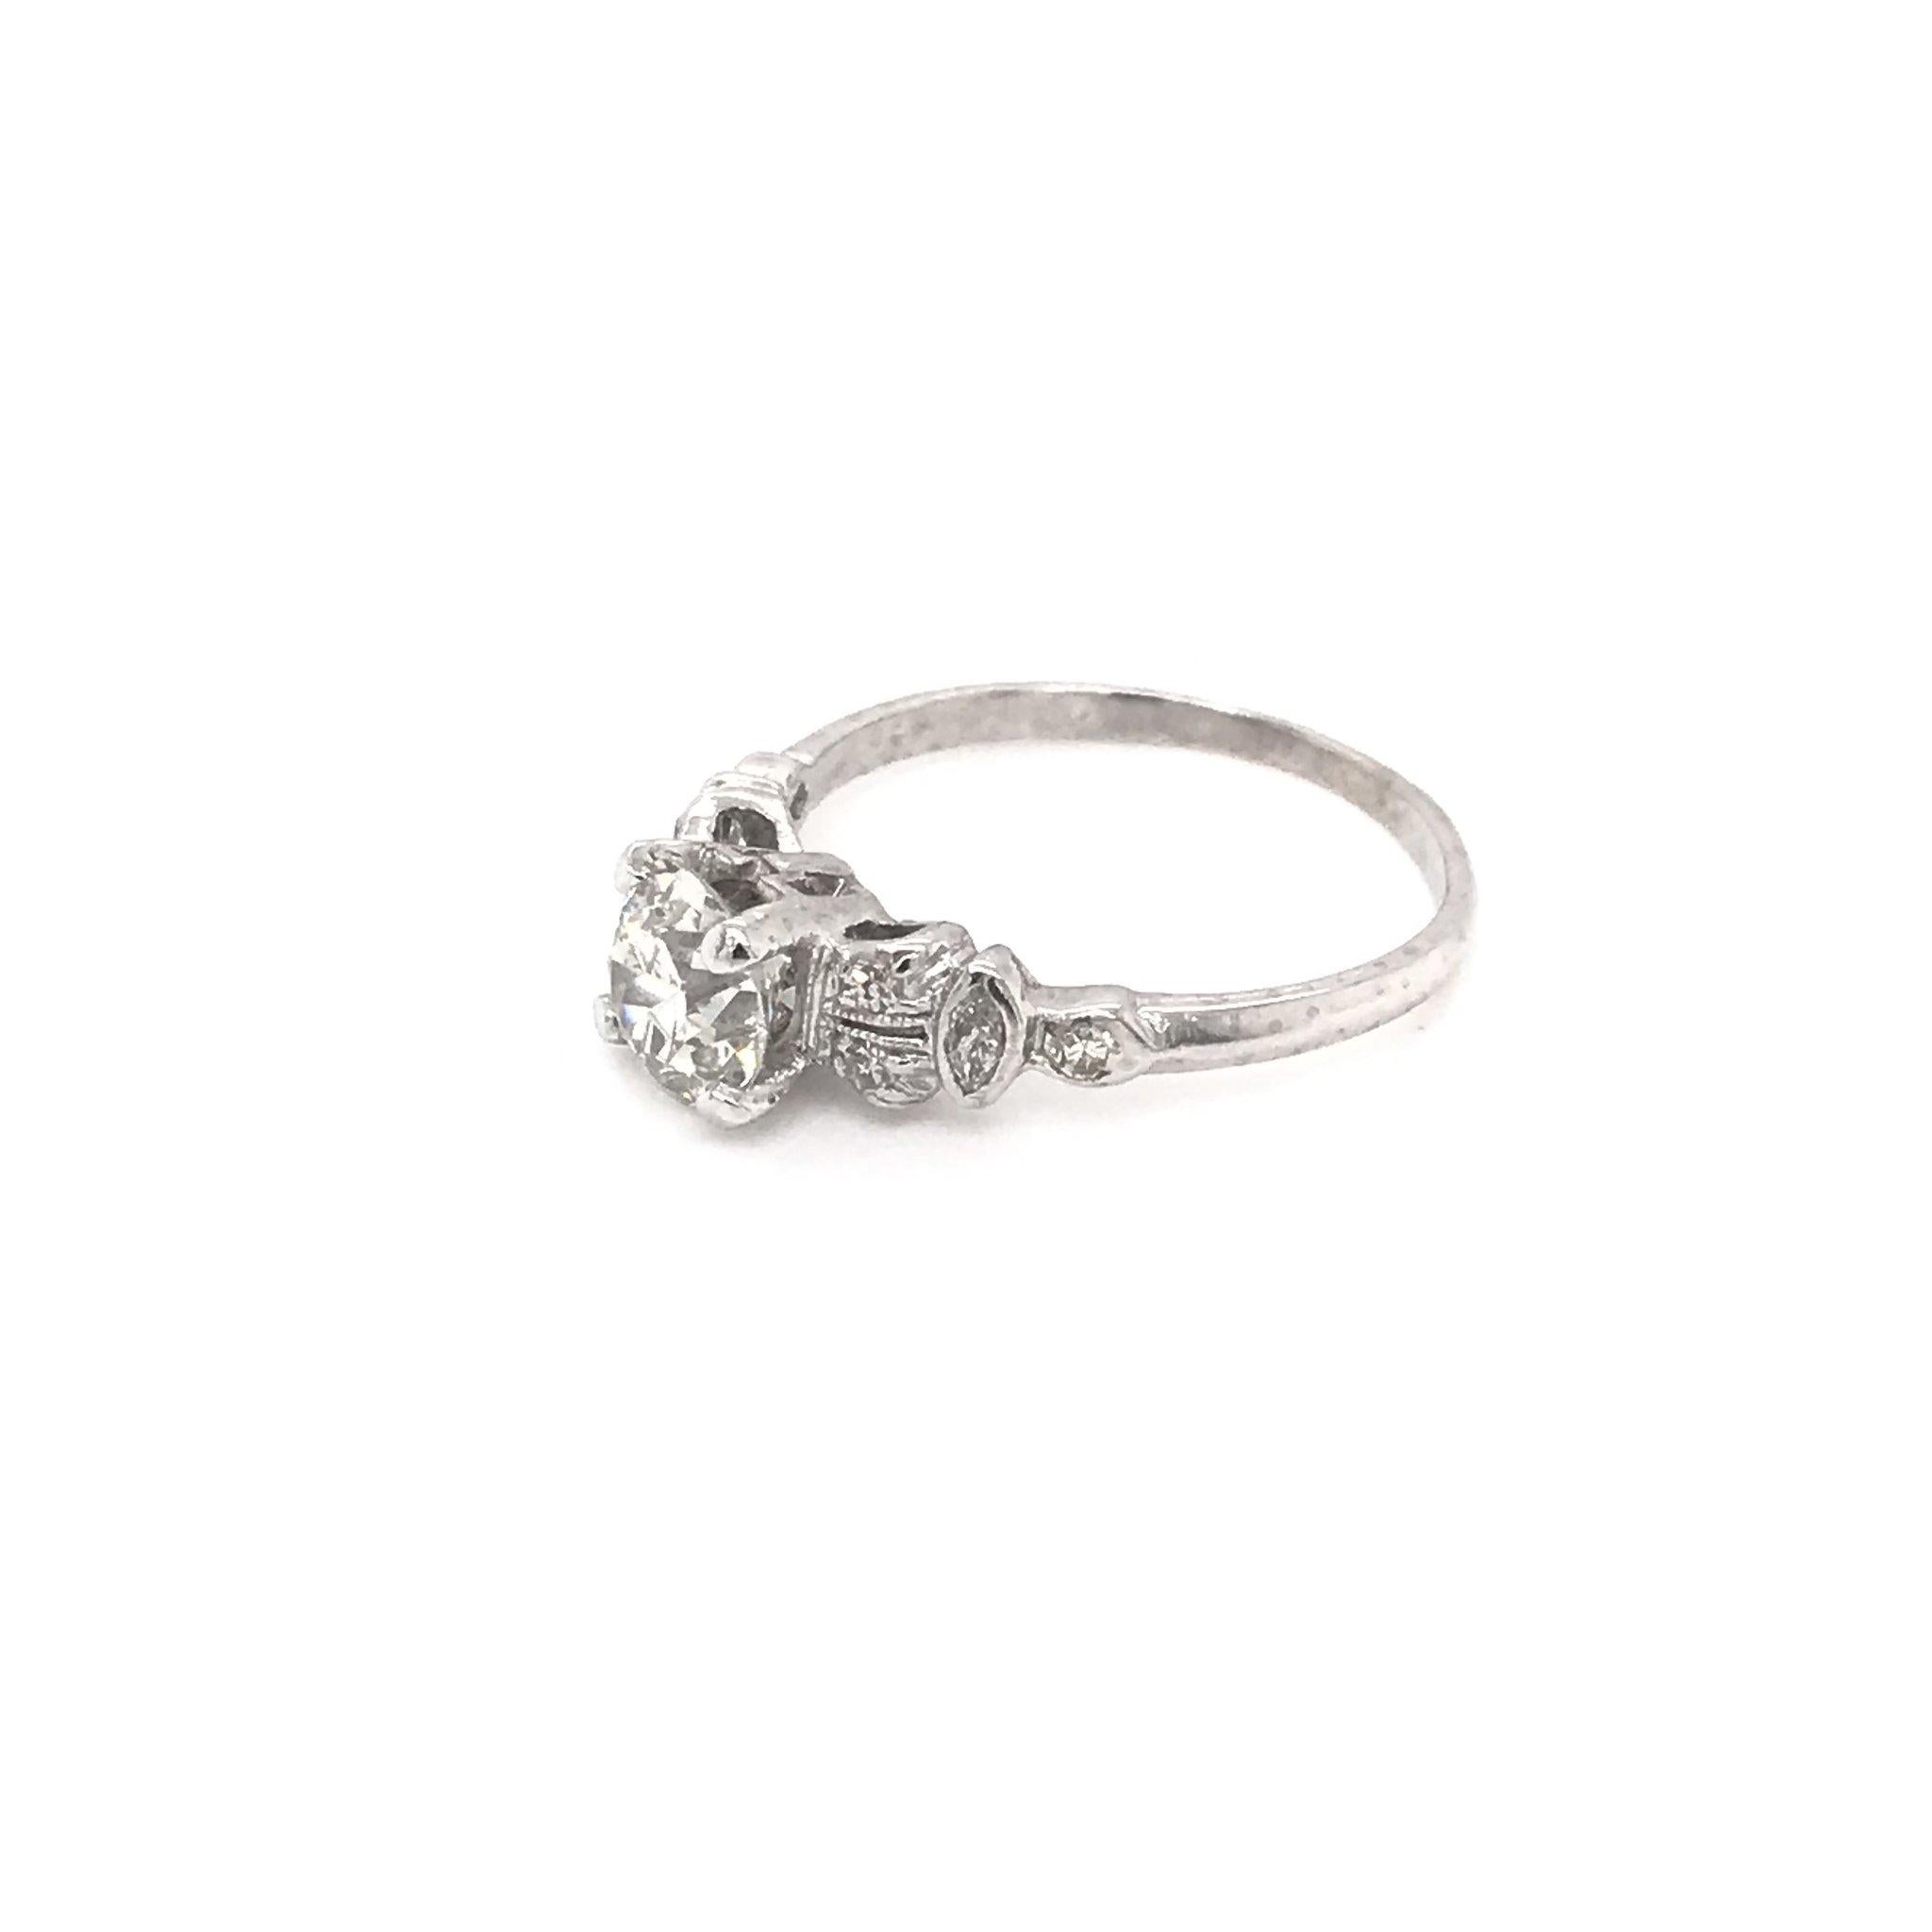 This antique piece was handcrafted sometime during the Art deco design period ( 1920-1940 ). The platinum setting is a sweet and simple solitaire style. The center diamond measures approximately 0.95 carats and grades approximately J in color, SI2